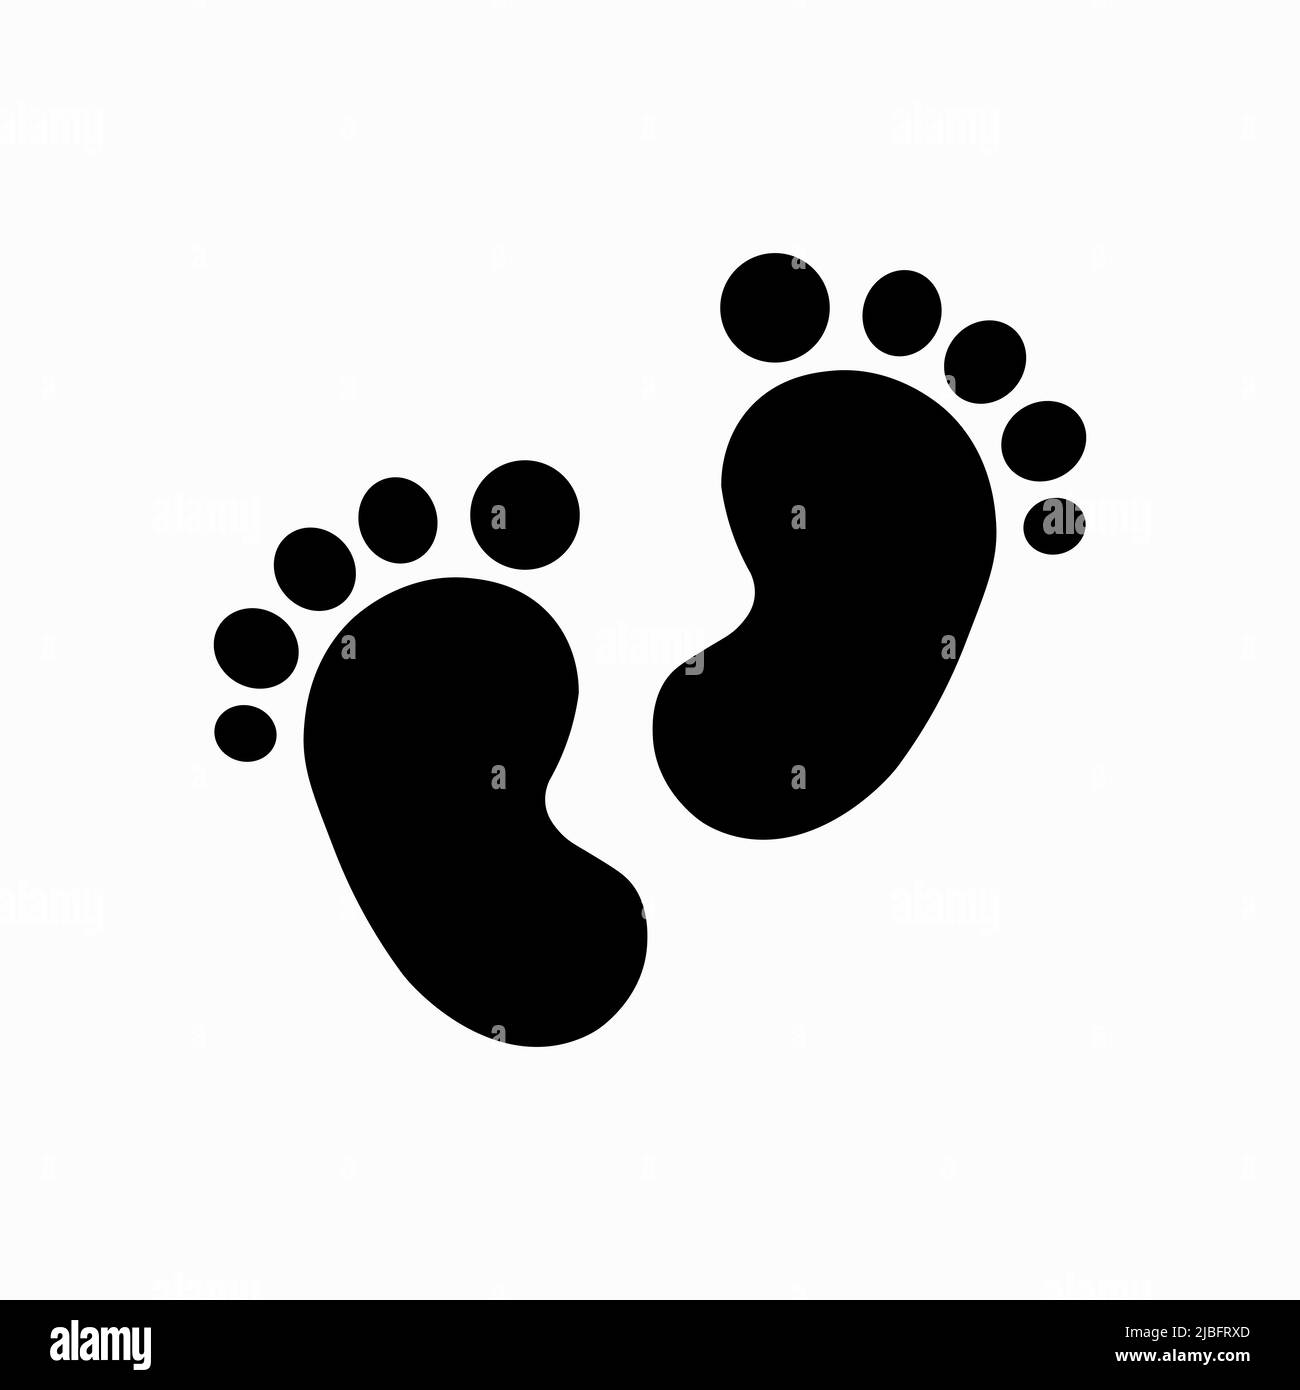 Baby feet icon. Flat child footprint symbol on white background. Stock Vector